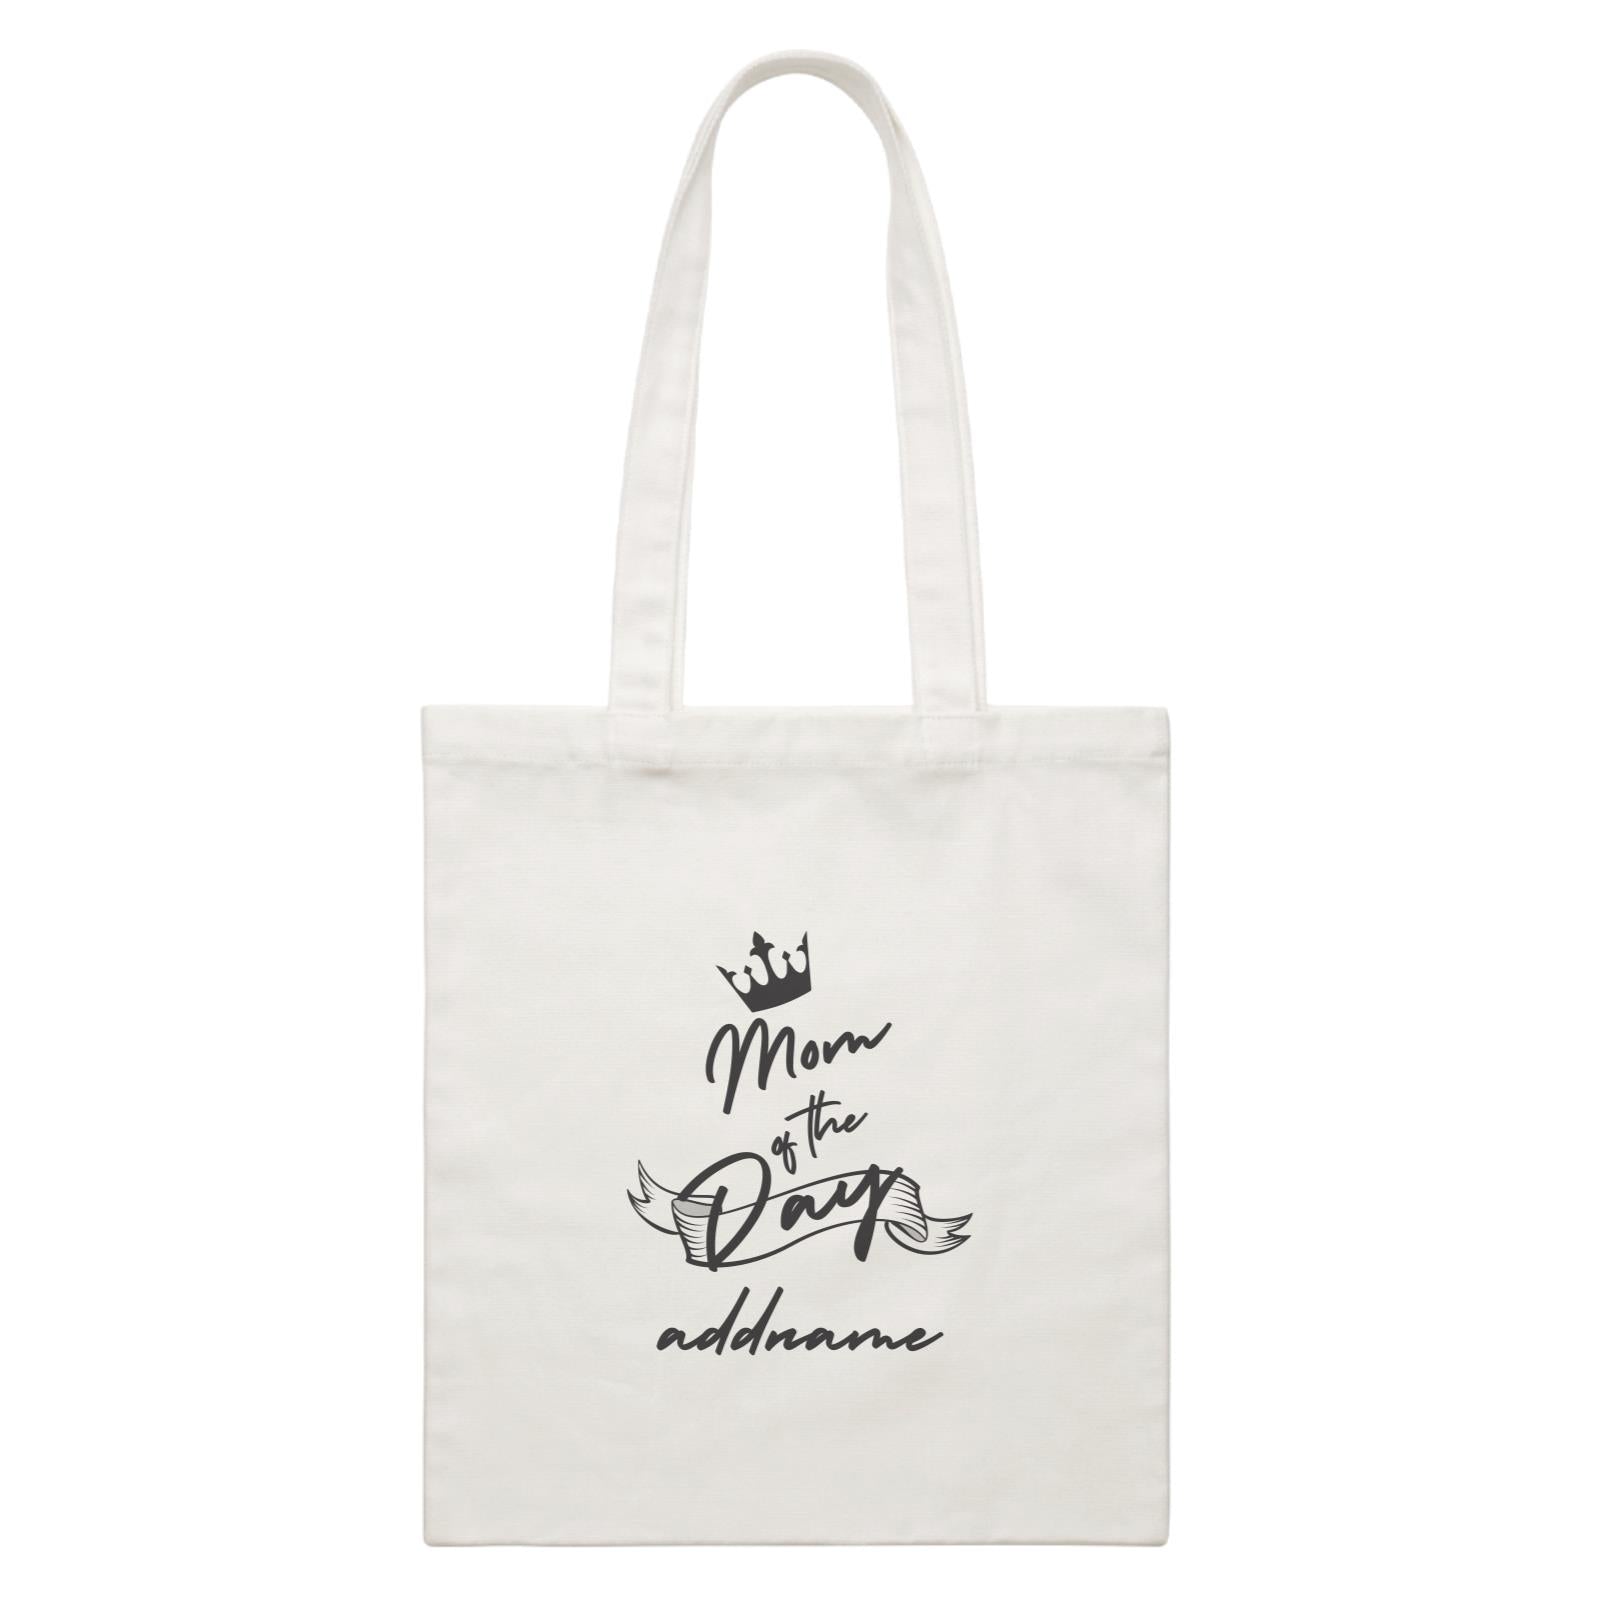 Birthday Typography Mom Of The Day Addname White Canvas Bag